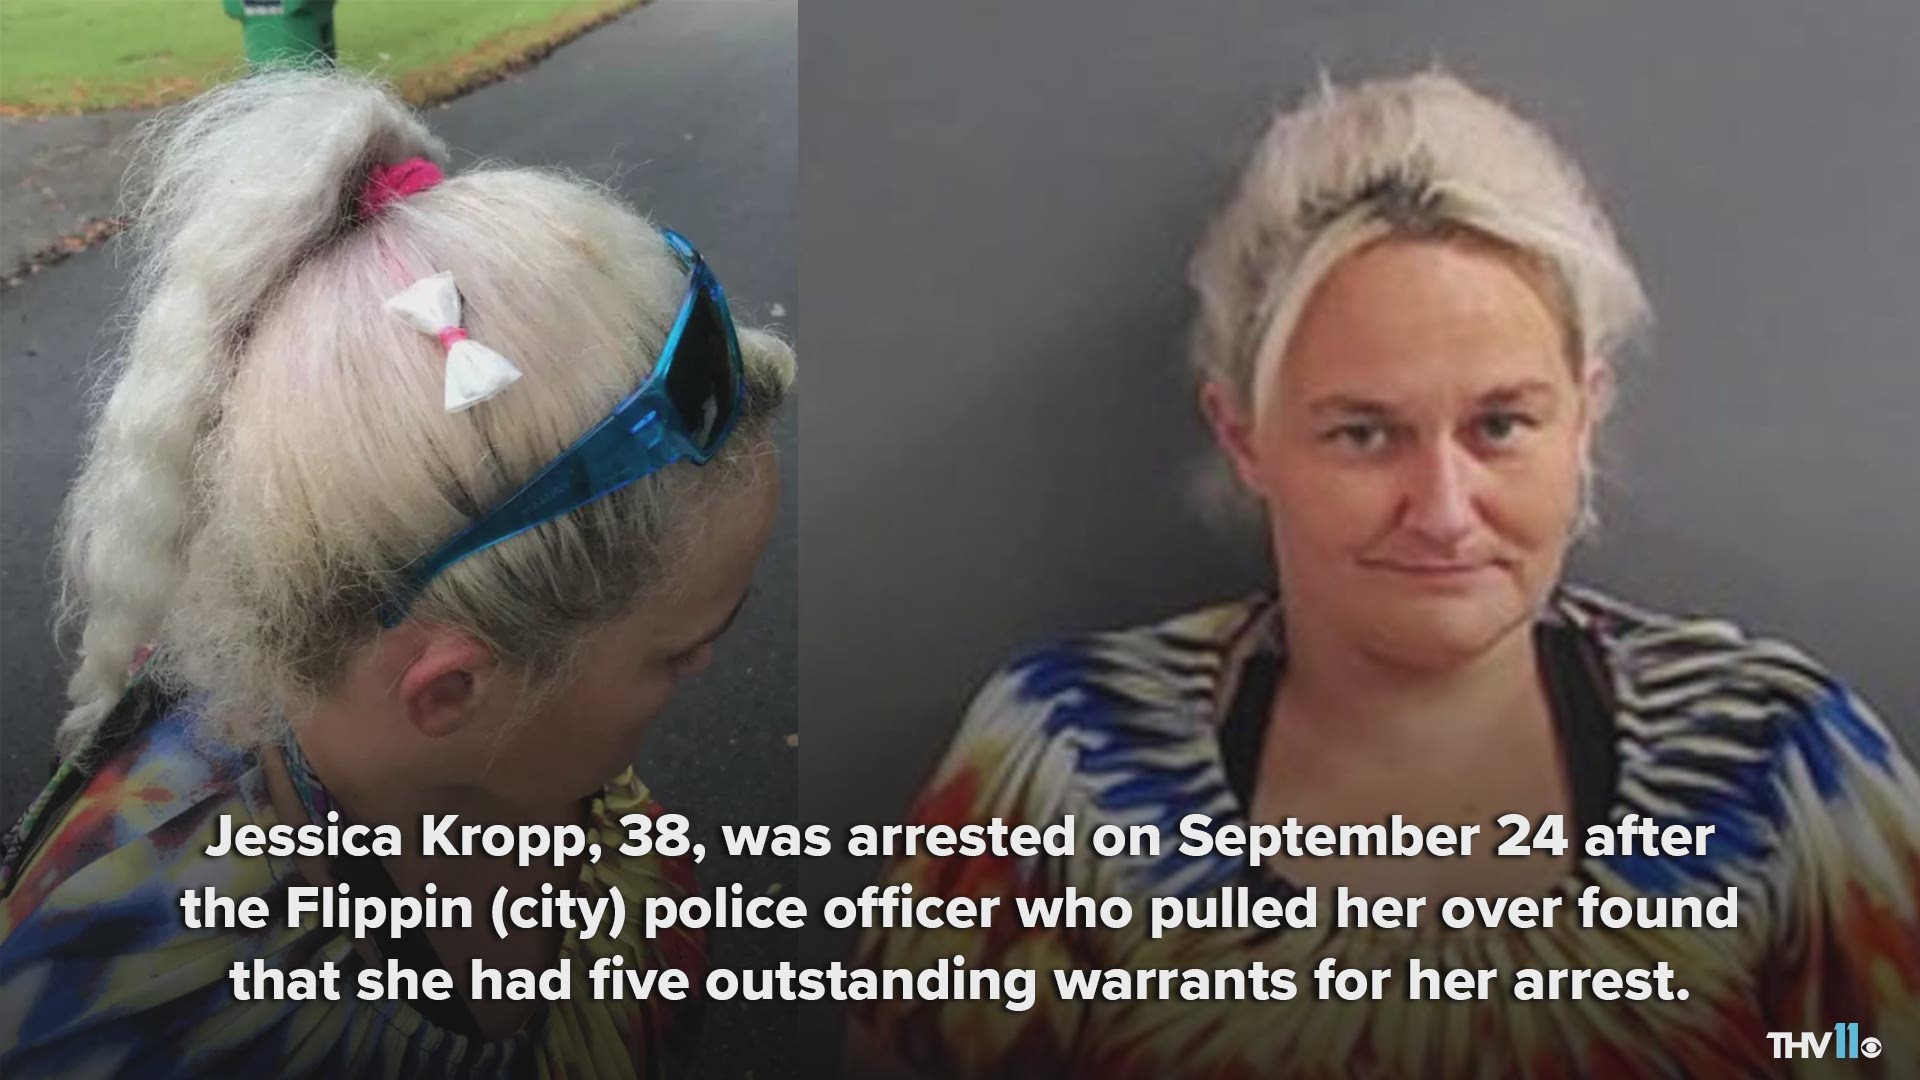 Jessica Kropp was arrested due to having five outstanding warrants when the officer noticed she was wearing a bow in her hair made of meth.